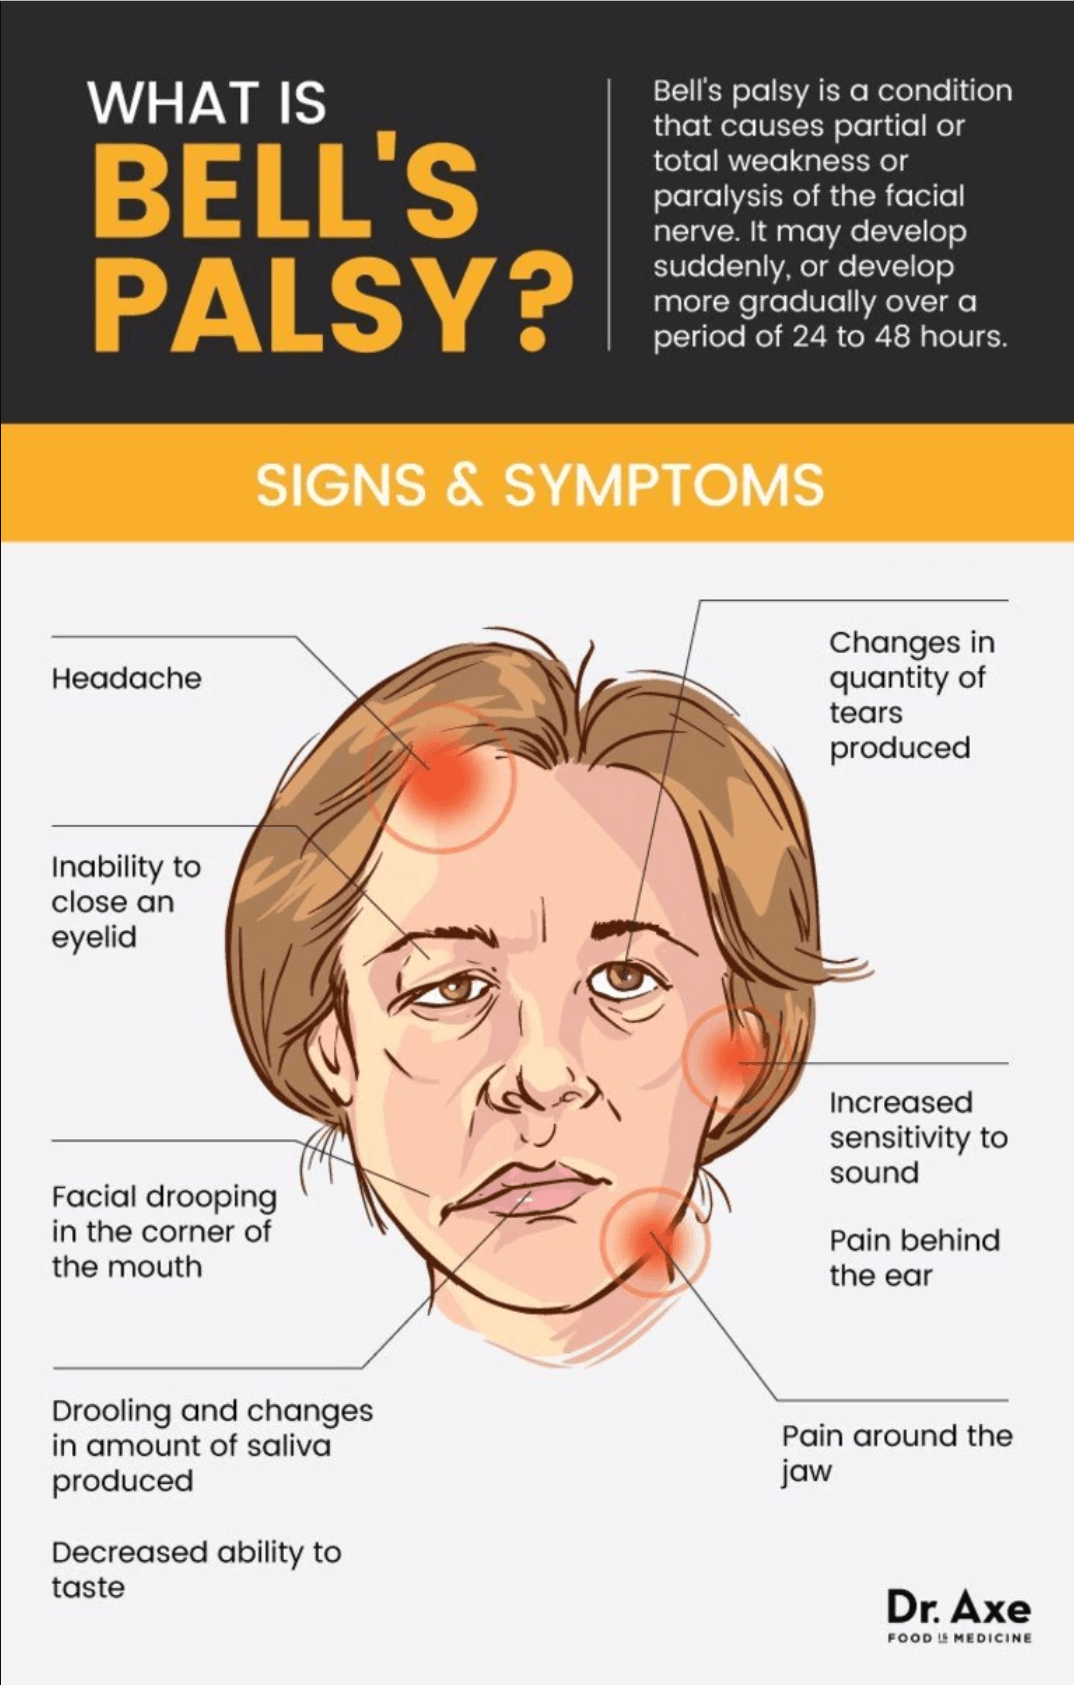 What Is Bells Palsy Caused By Bovenmen Shop 42054 The Best Porn Website